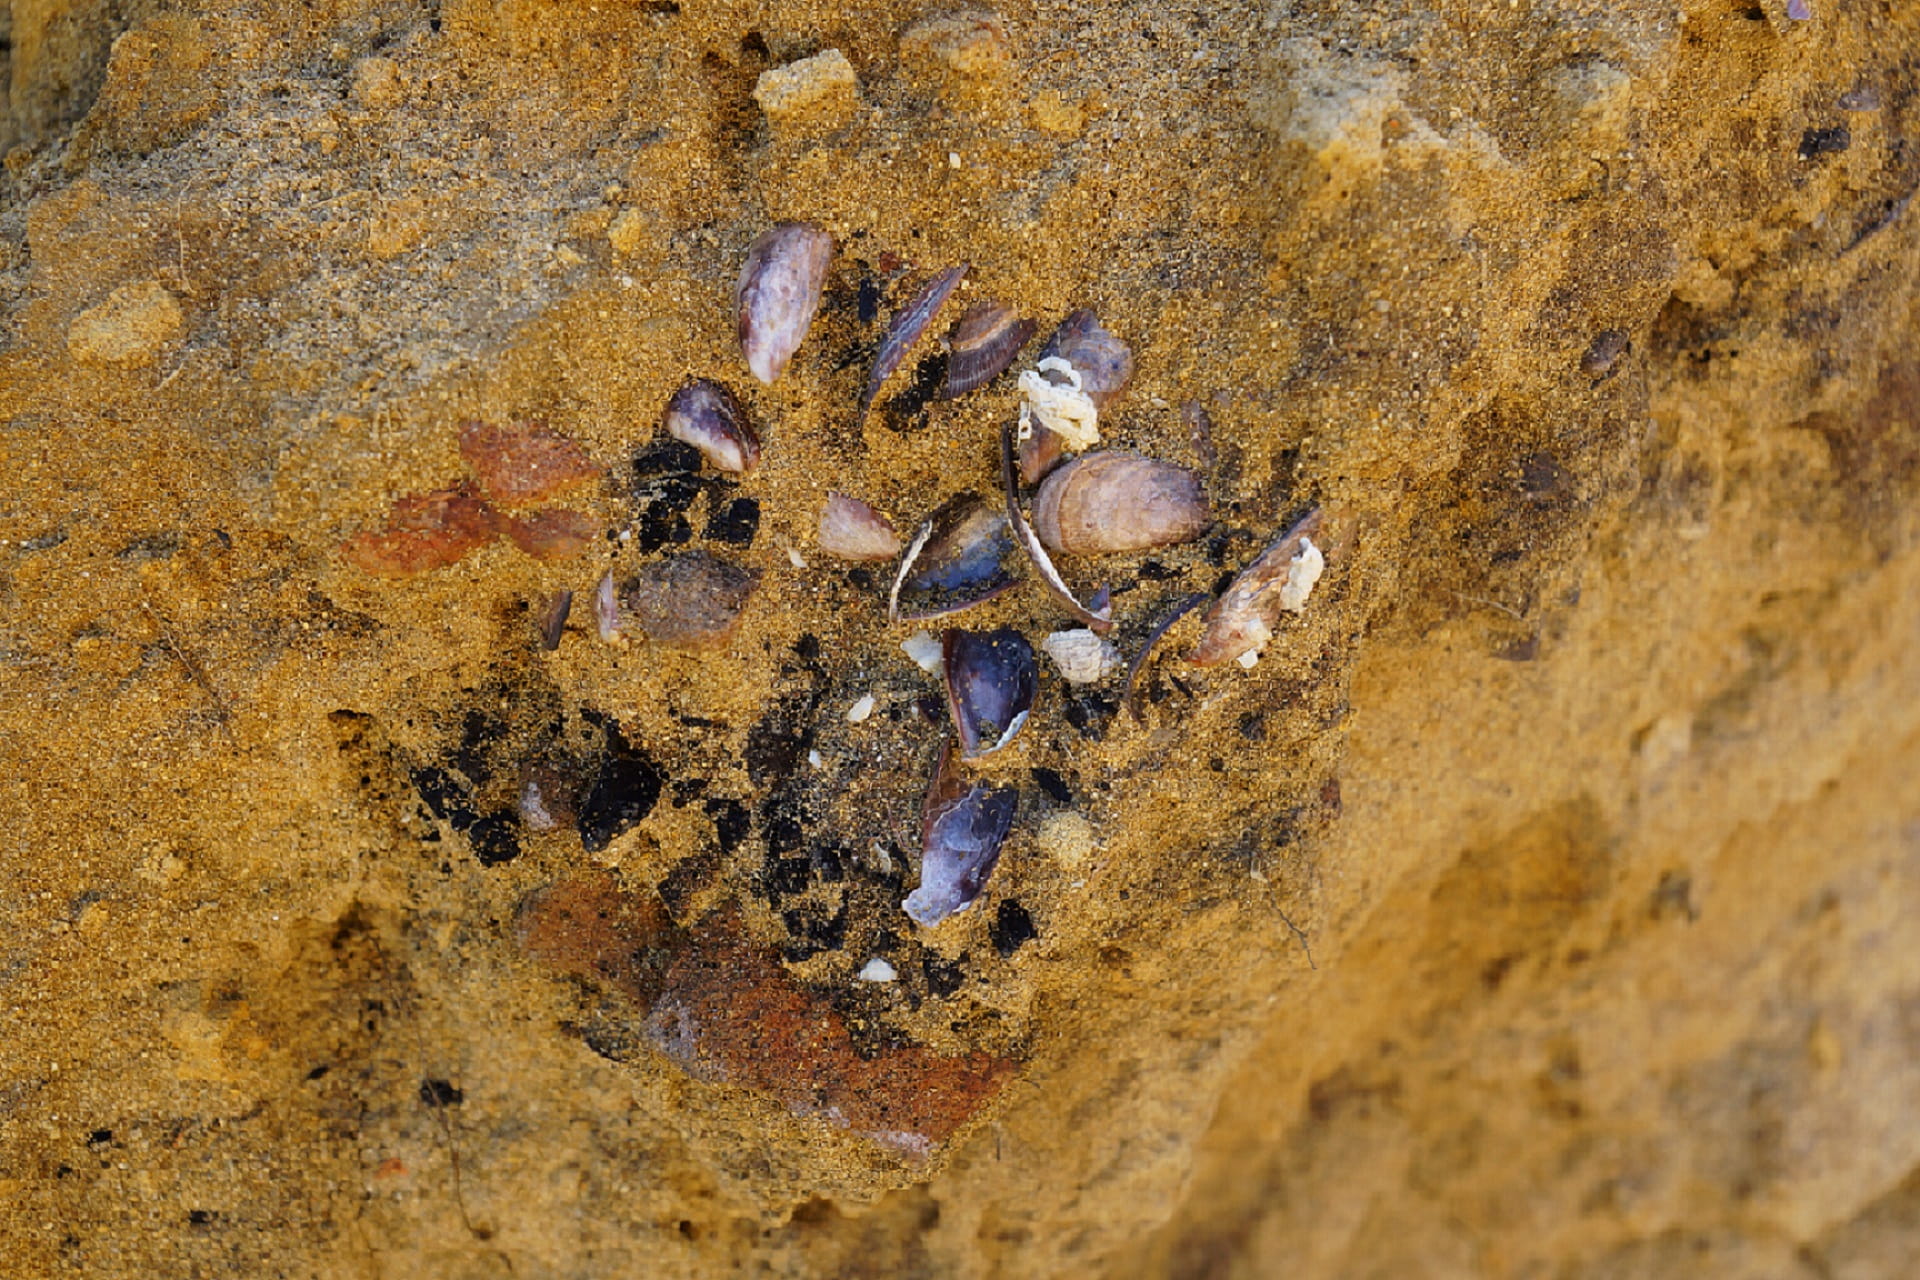 Midden s are shell deposits that have built up over time, often as the result of Aboriginal people gathering and eating shellfish and molluscs.